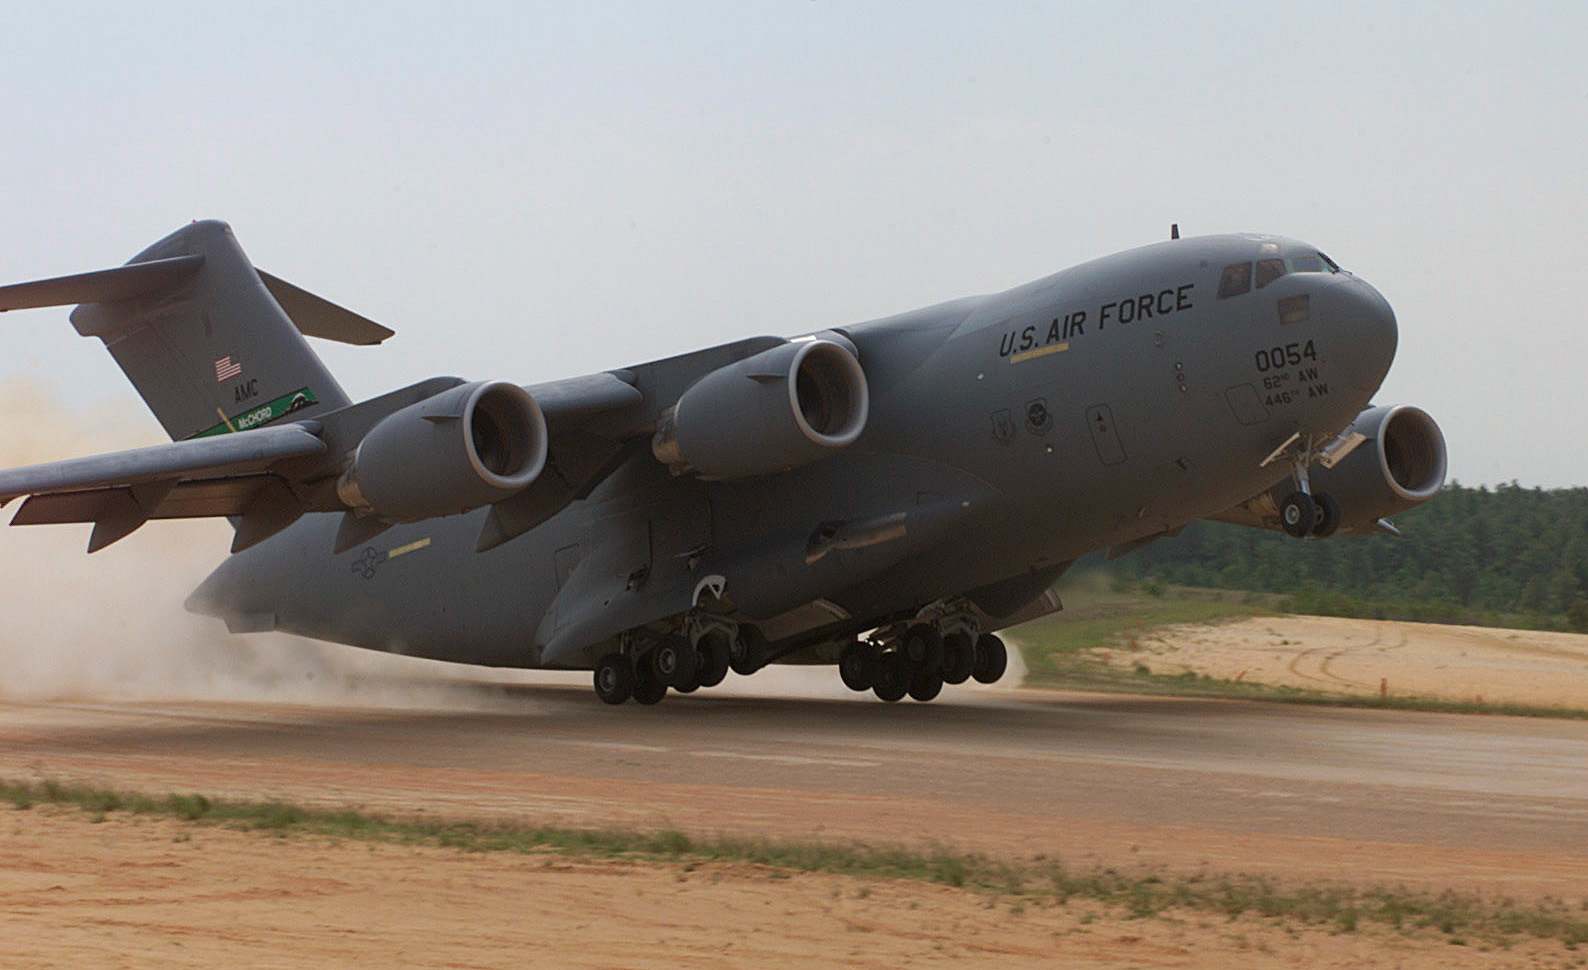 IAF plans to induct 10 large, C-17 Globemaster III aircraft. Boeing has almost finalized a deal to supply 10 of these C-17 for the IAF strategic lift capability, with an option to buy another 10 in future!